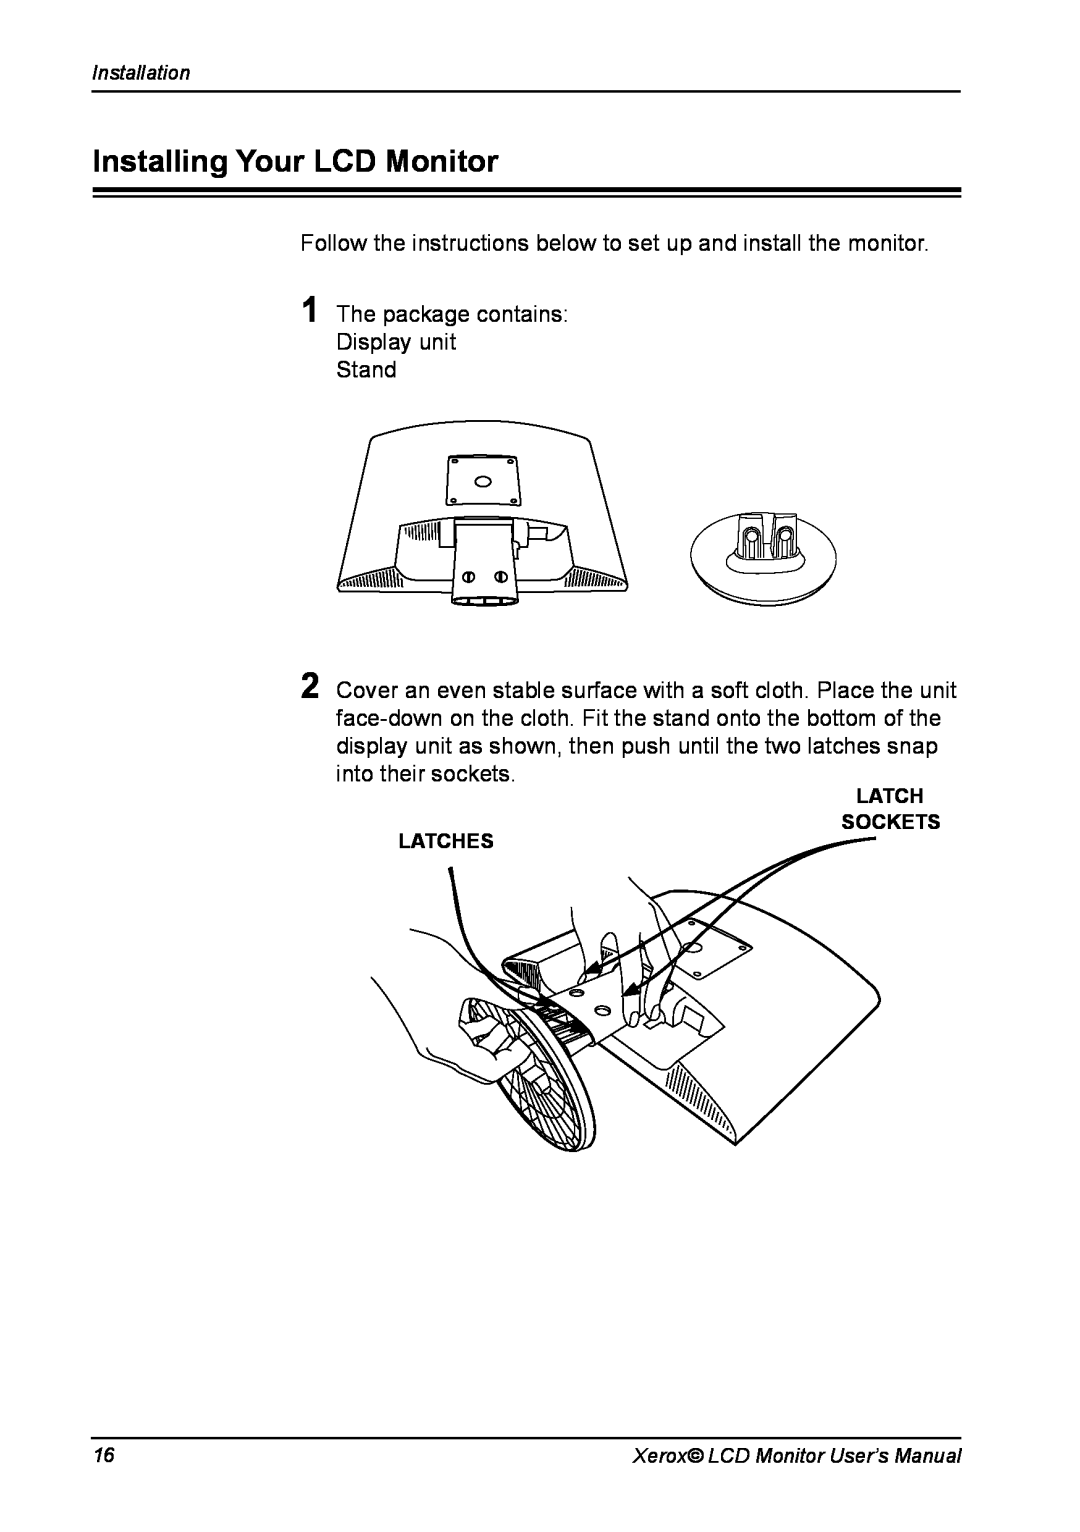 Xerox XM3-19w Installing Your LCD Monitor, Follow the instructions below to set up and install the monitor, Installation 